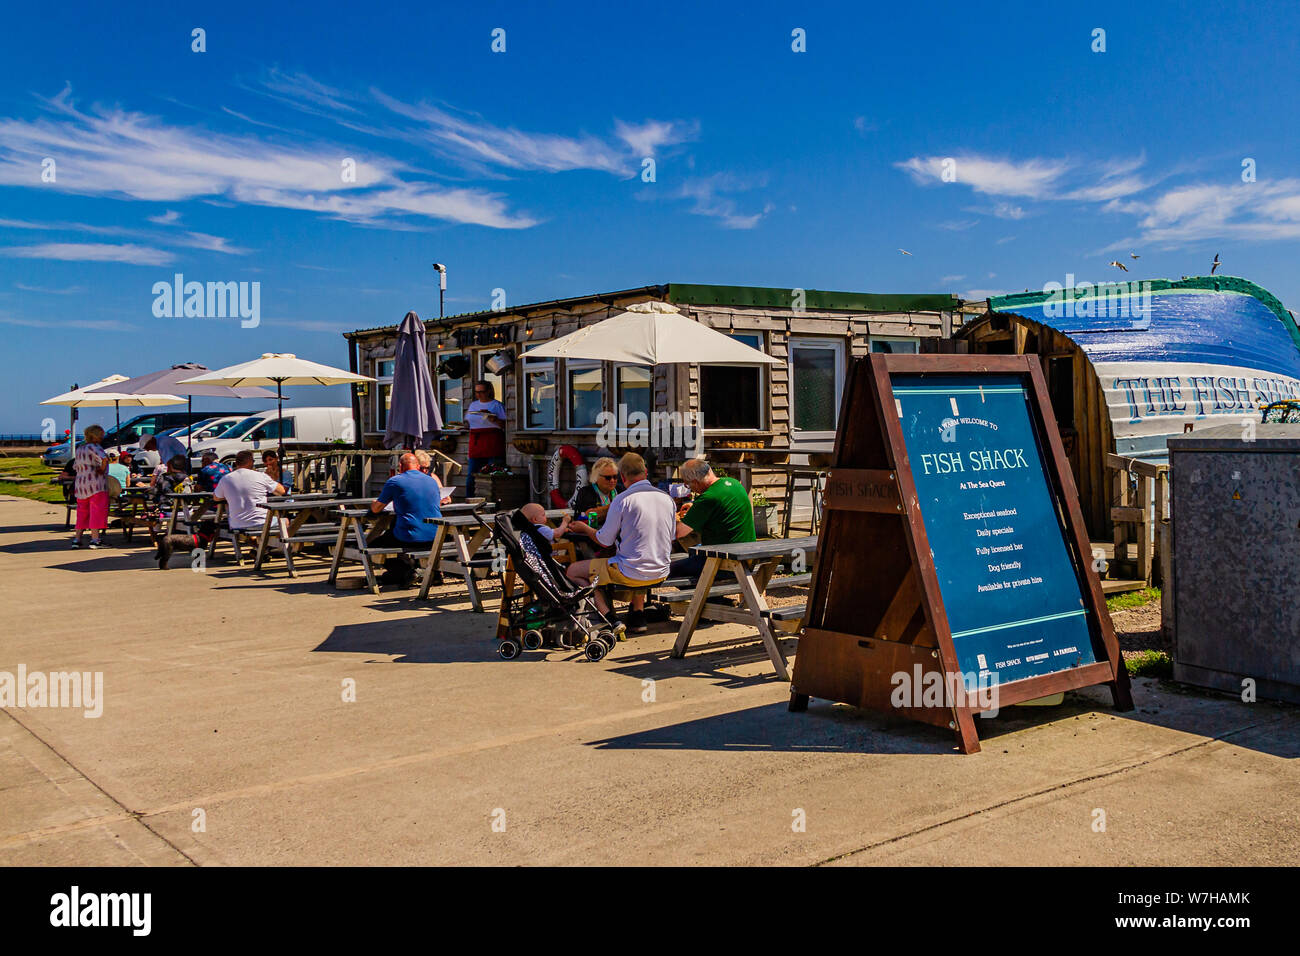 The Fish Shack, a seafood restaurant partly inside an old upturned boat, by the harbour in Amble, Northumberland, UK. July 2019. Stock Photo